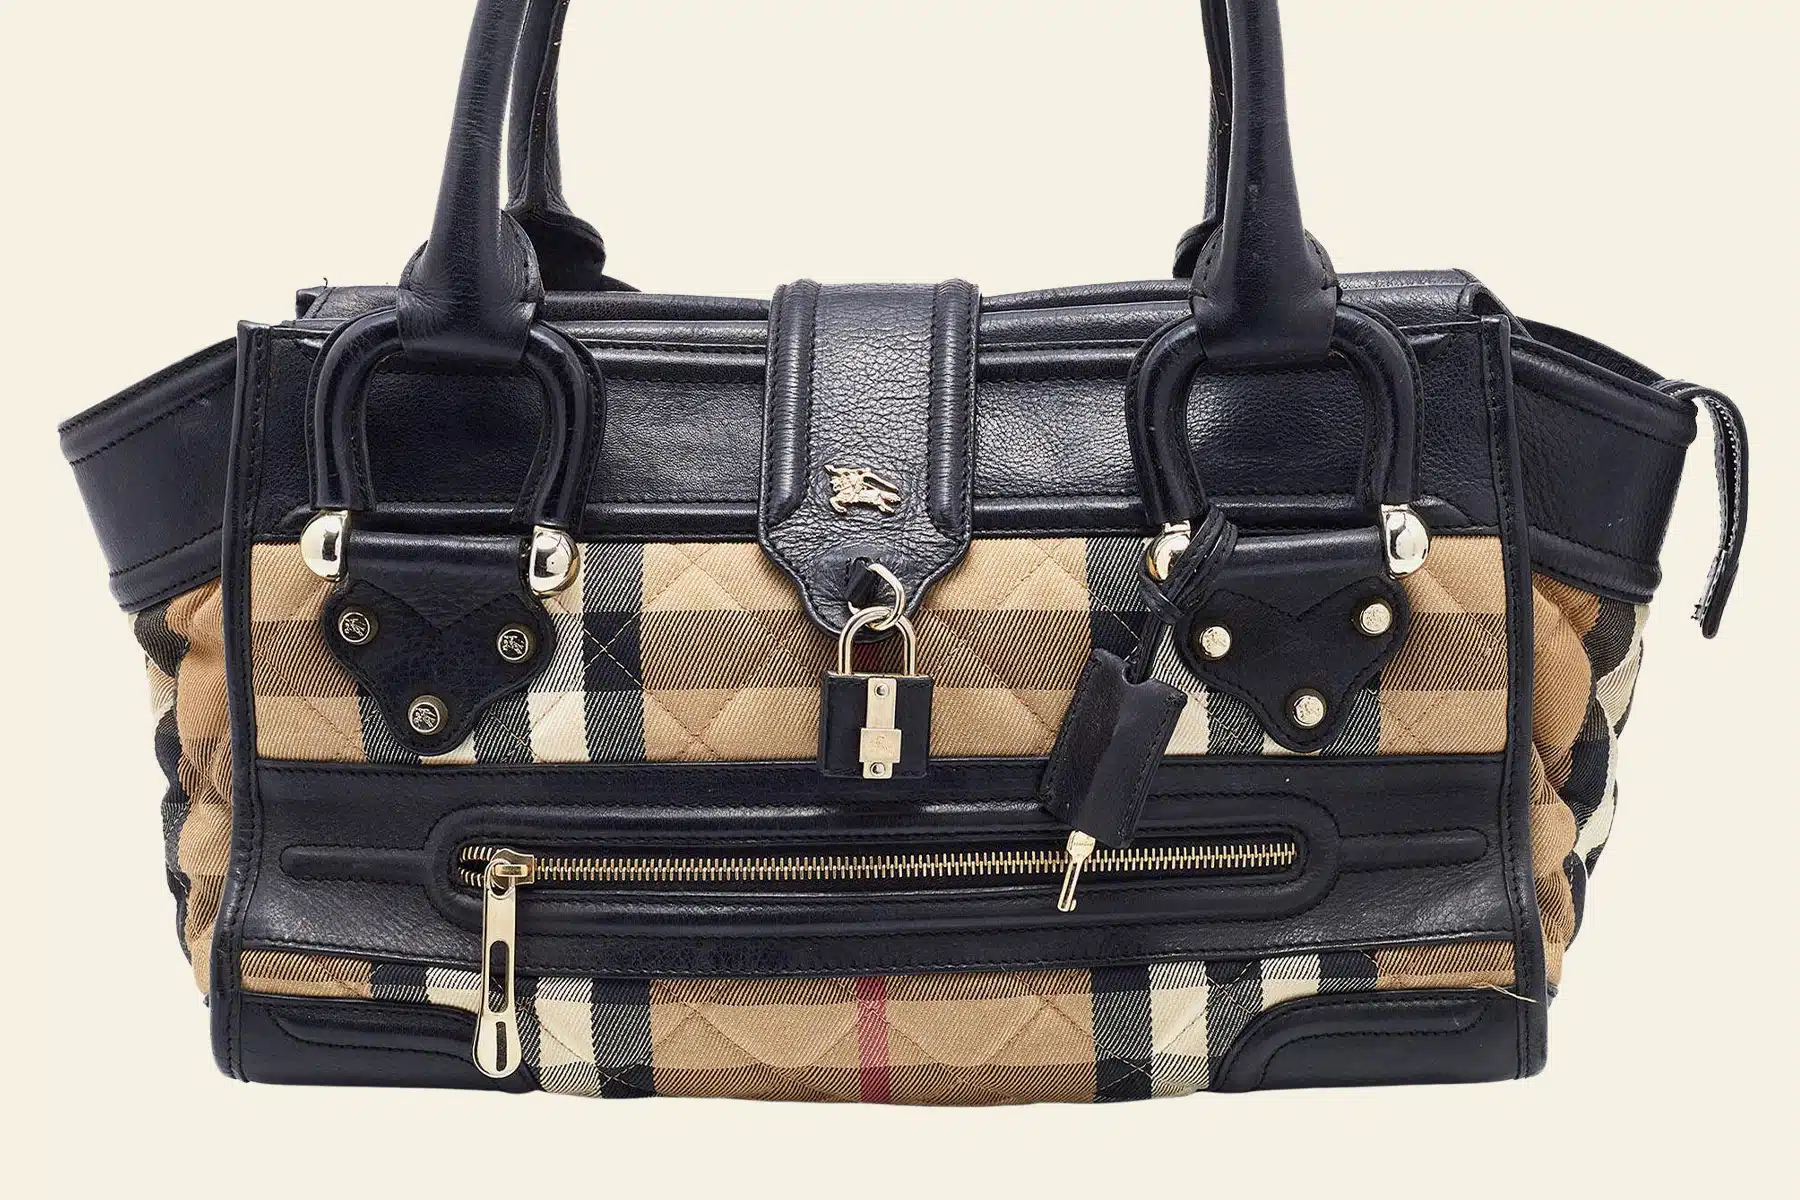 How to Tell If Your Burberry Coat or Bag Is Authentic - The Study